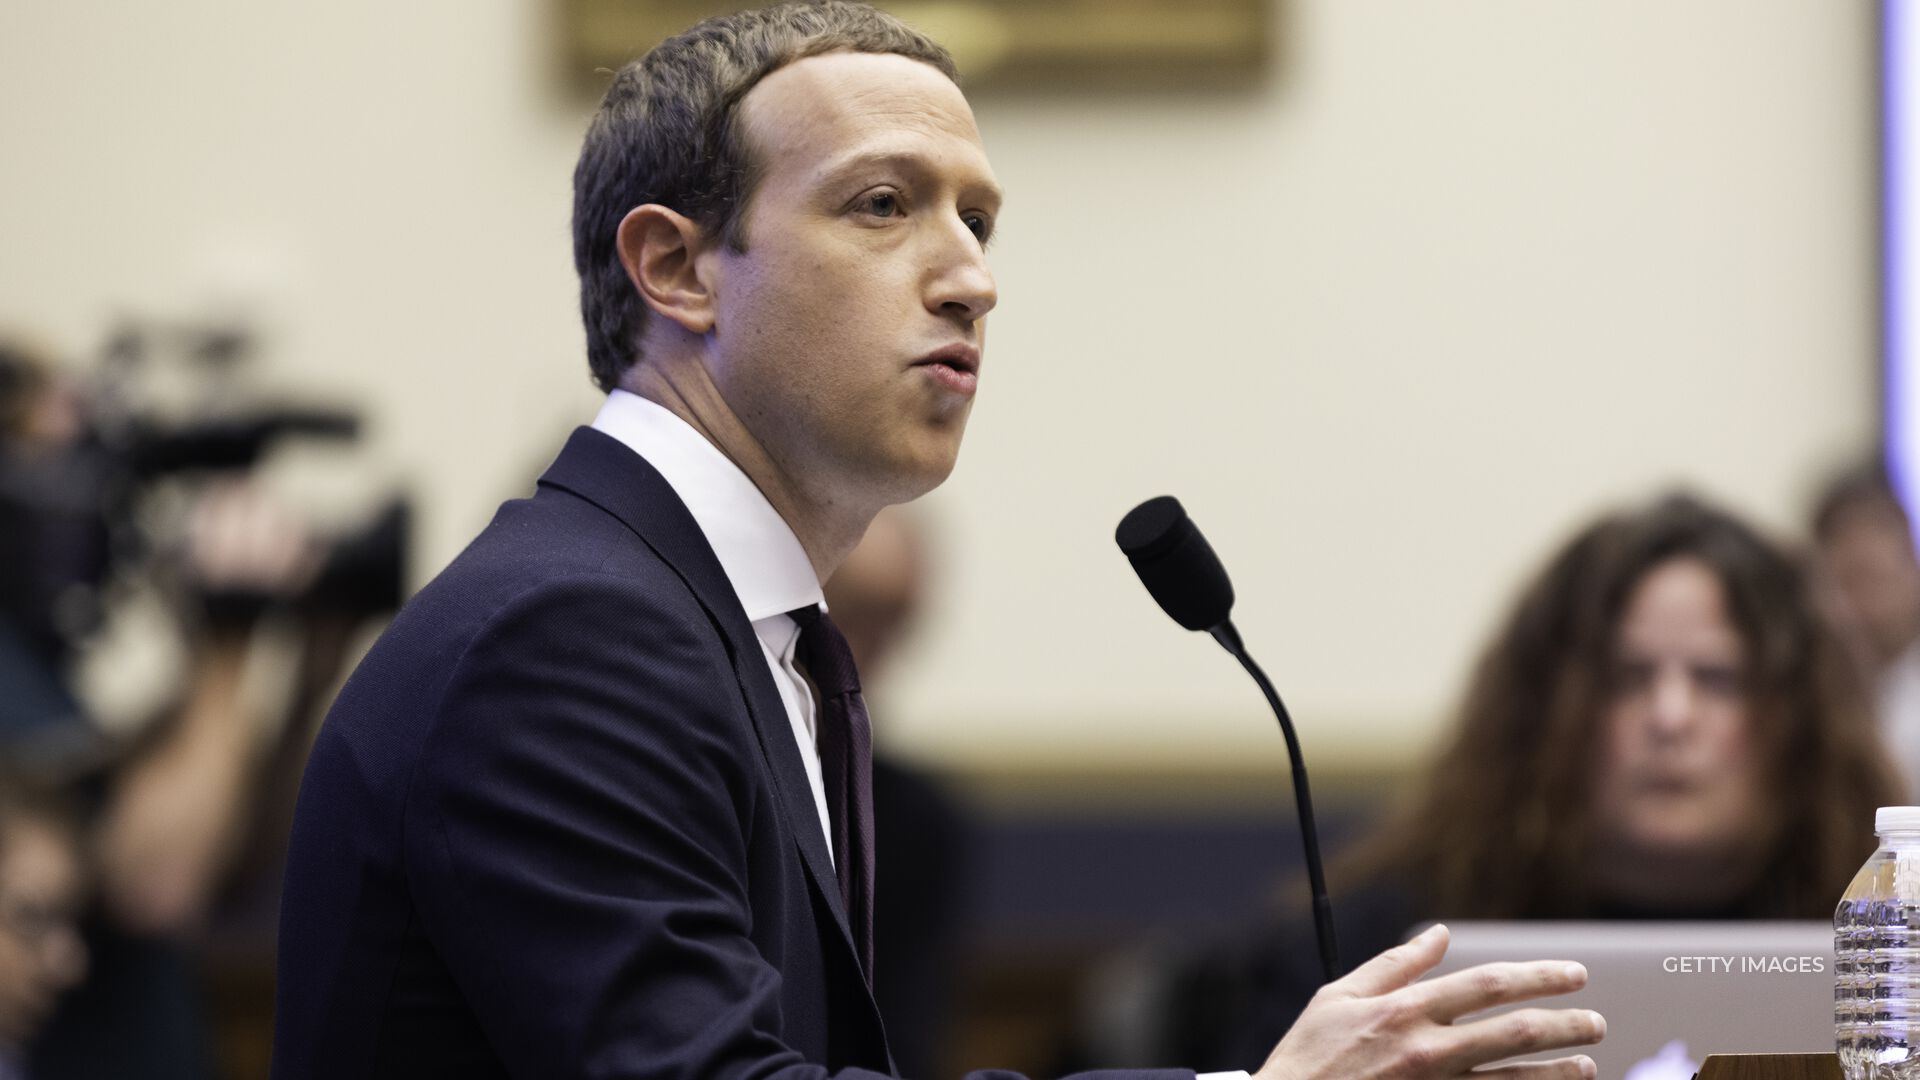 Facebook CEO Mark Zuckerberg is set to be questioned in court over the privacy of its users. The deposition is part of an ongoing lawsuit in California.